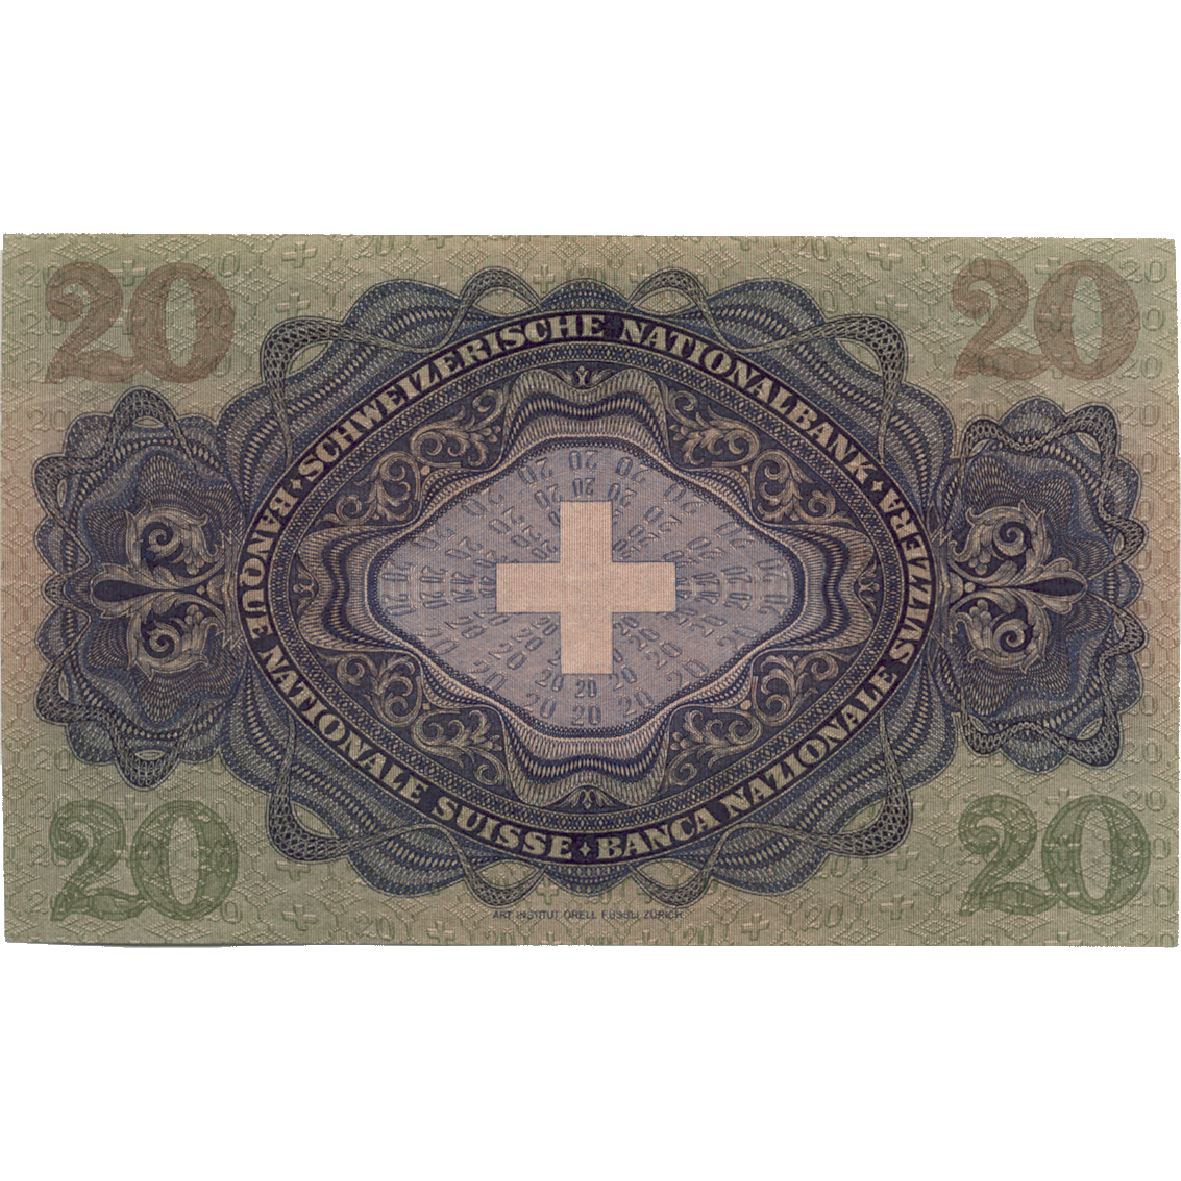 Swiss Confederation, 20 Francs (3rd Banknote Series, in Circulation 1918-1956) (reverse)